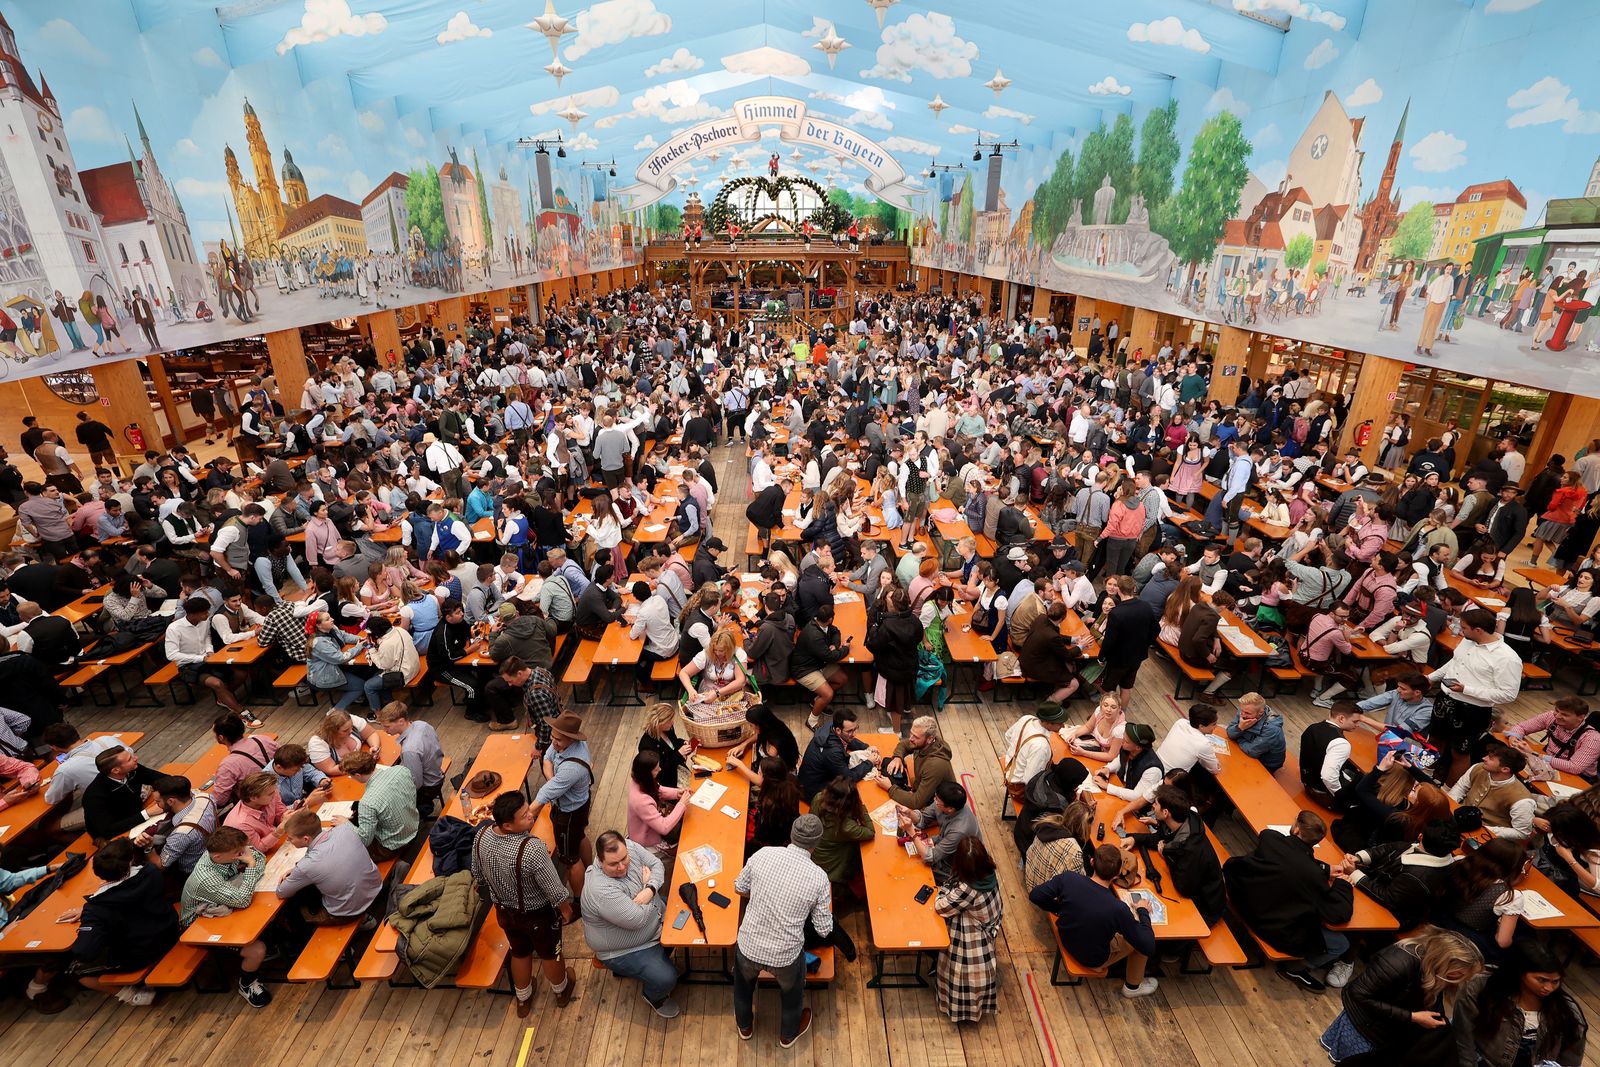 Crowds Pour in for Oktoberfest After Two Years of Pandemic Closures | Smart  News| Smithsonian Magazine